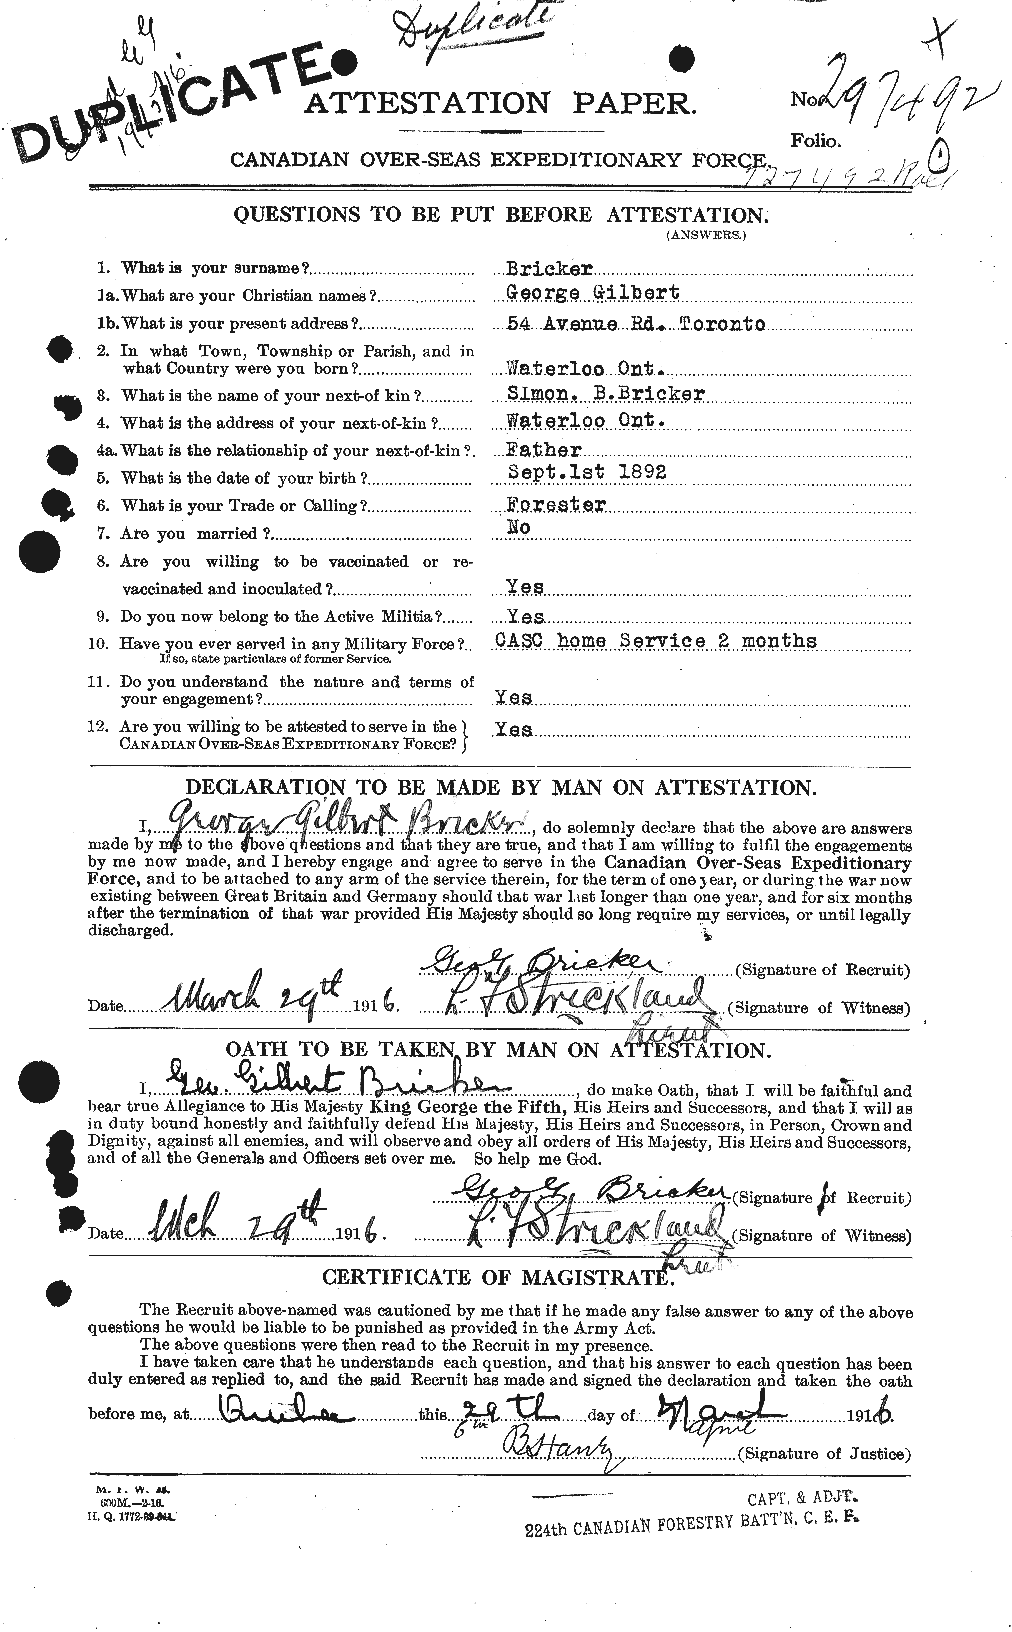 Personnel Records of the First World War - CEF 261191a